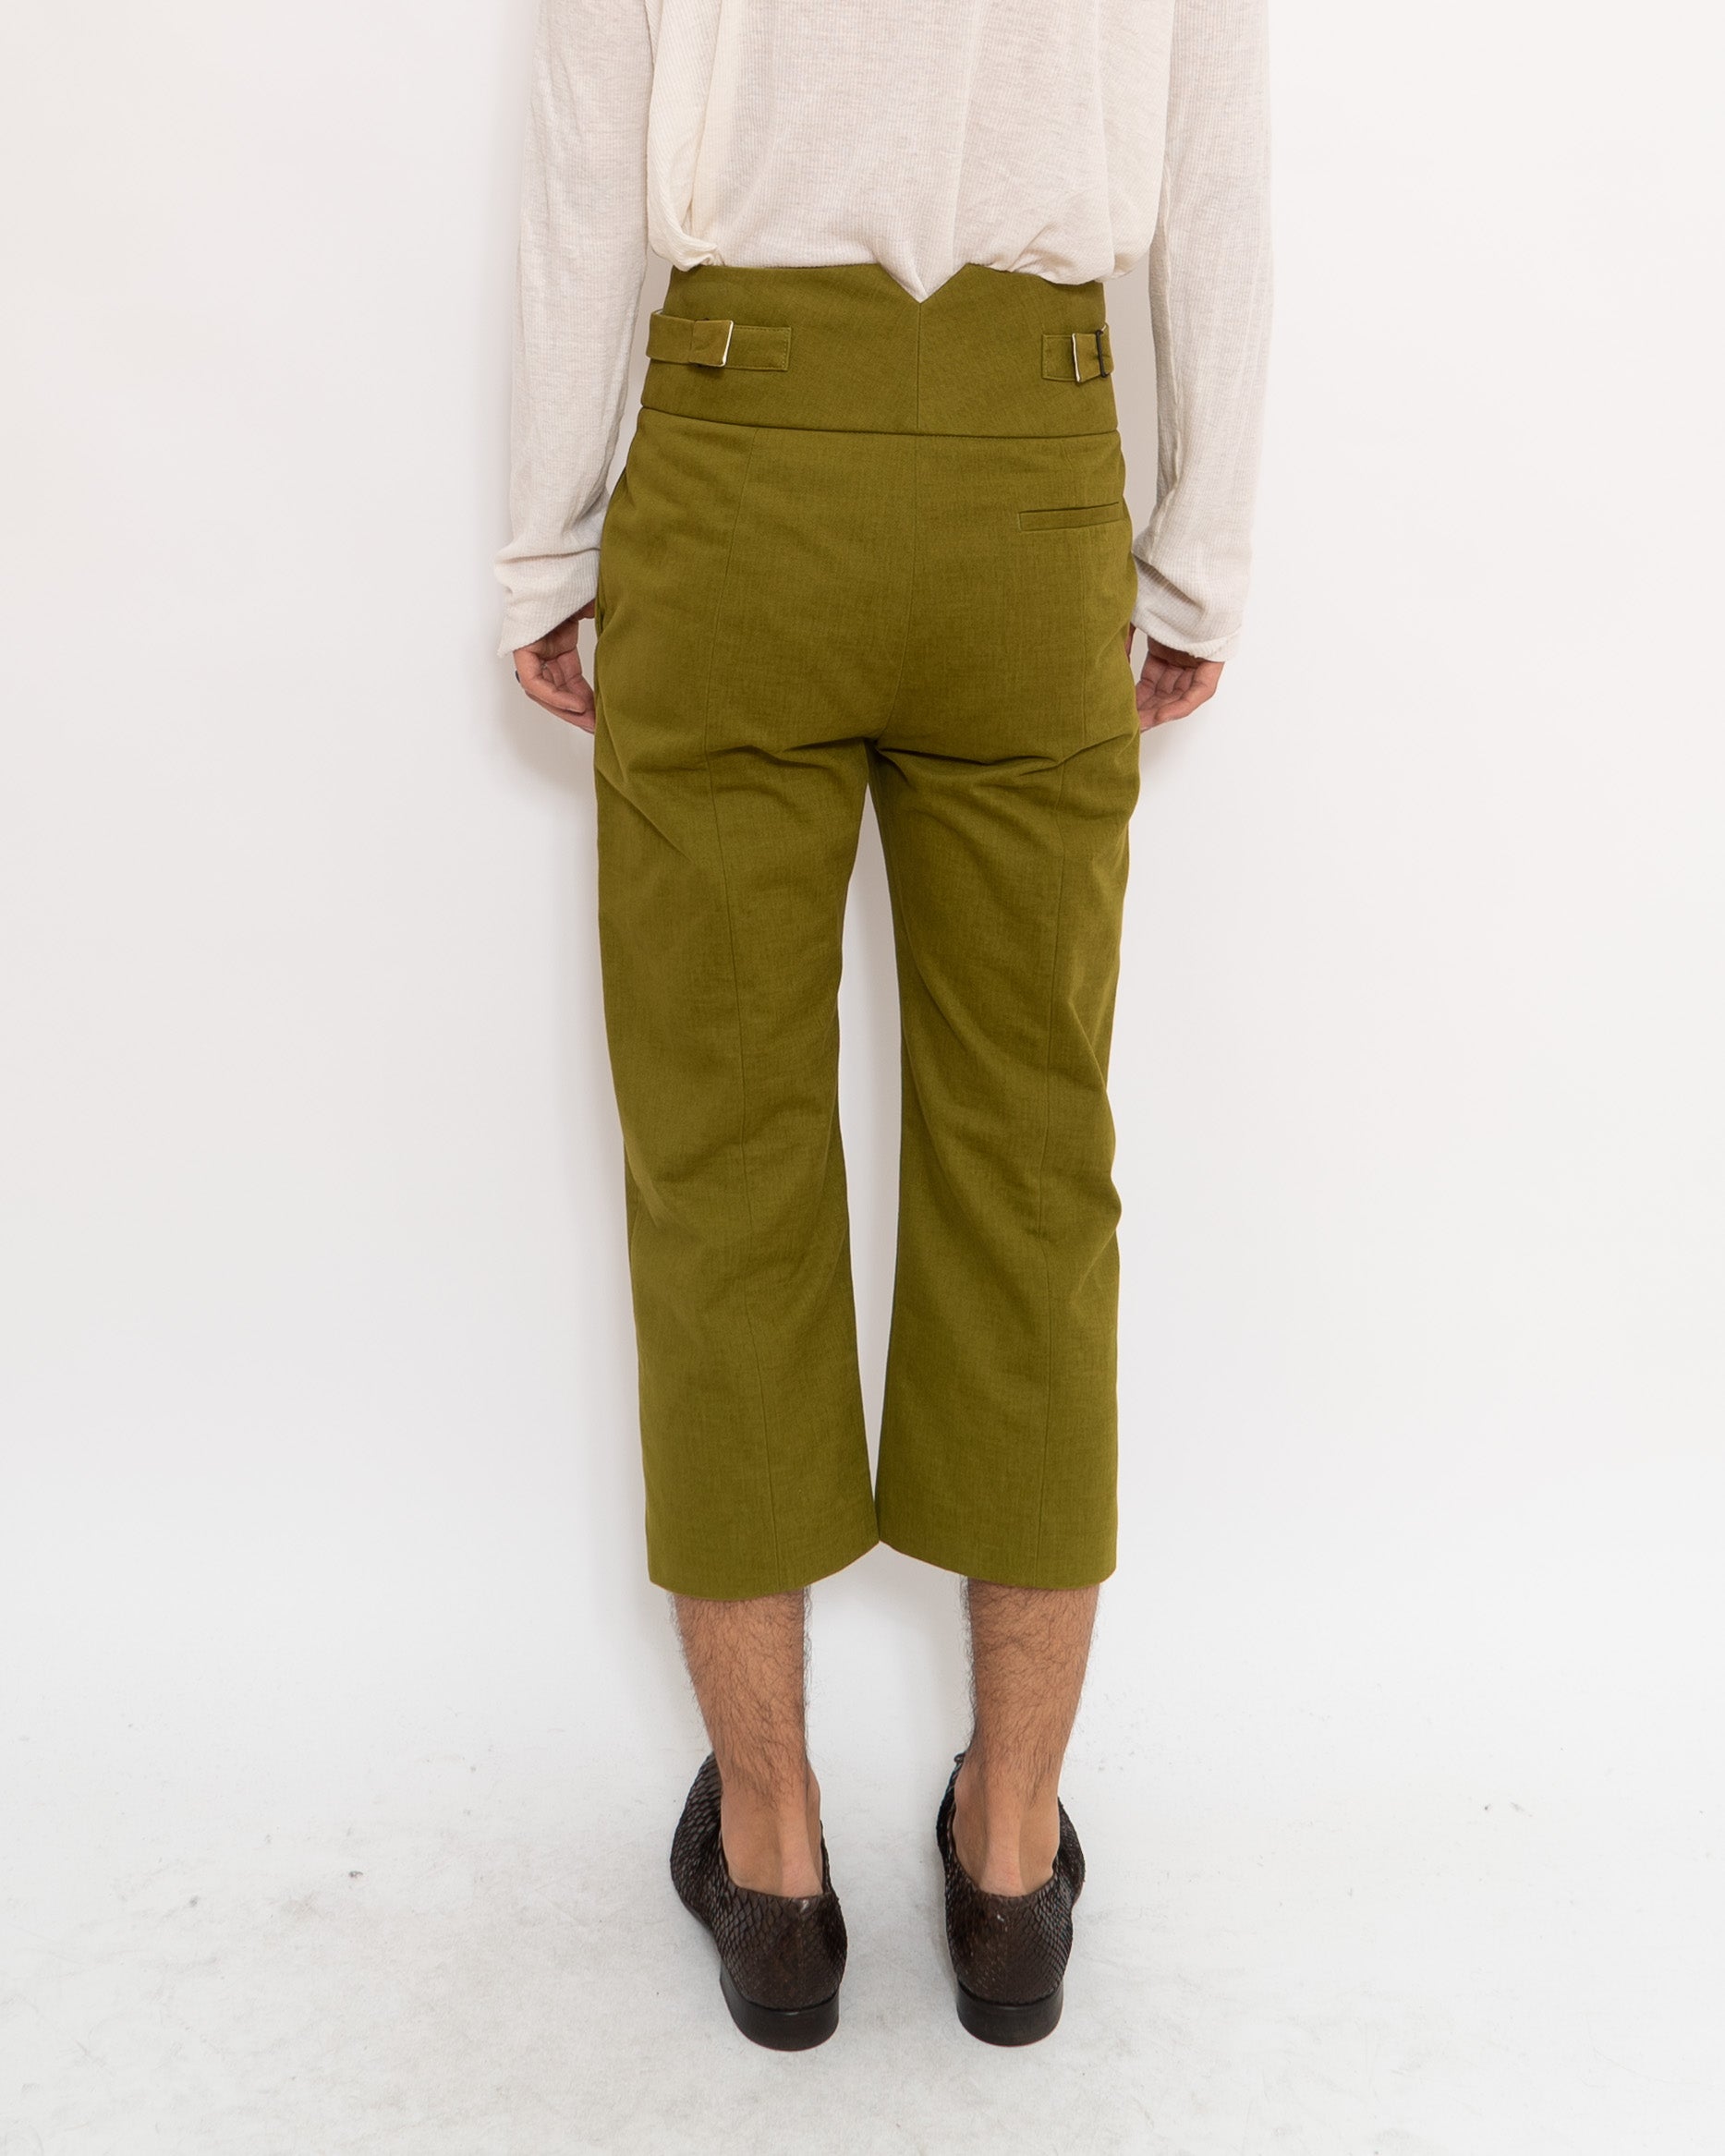 FW20 Poison Green Cropped Trousers Sample